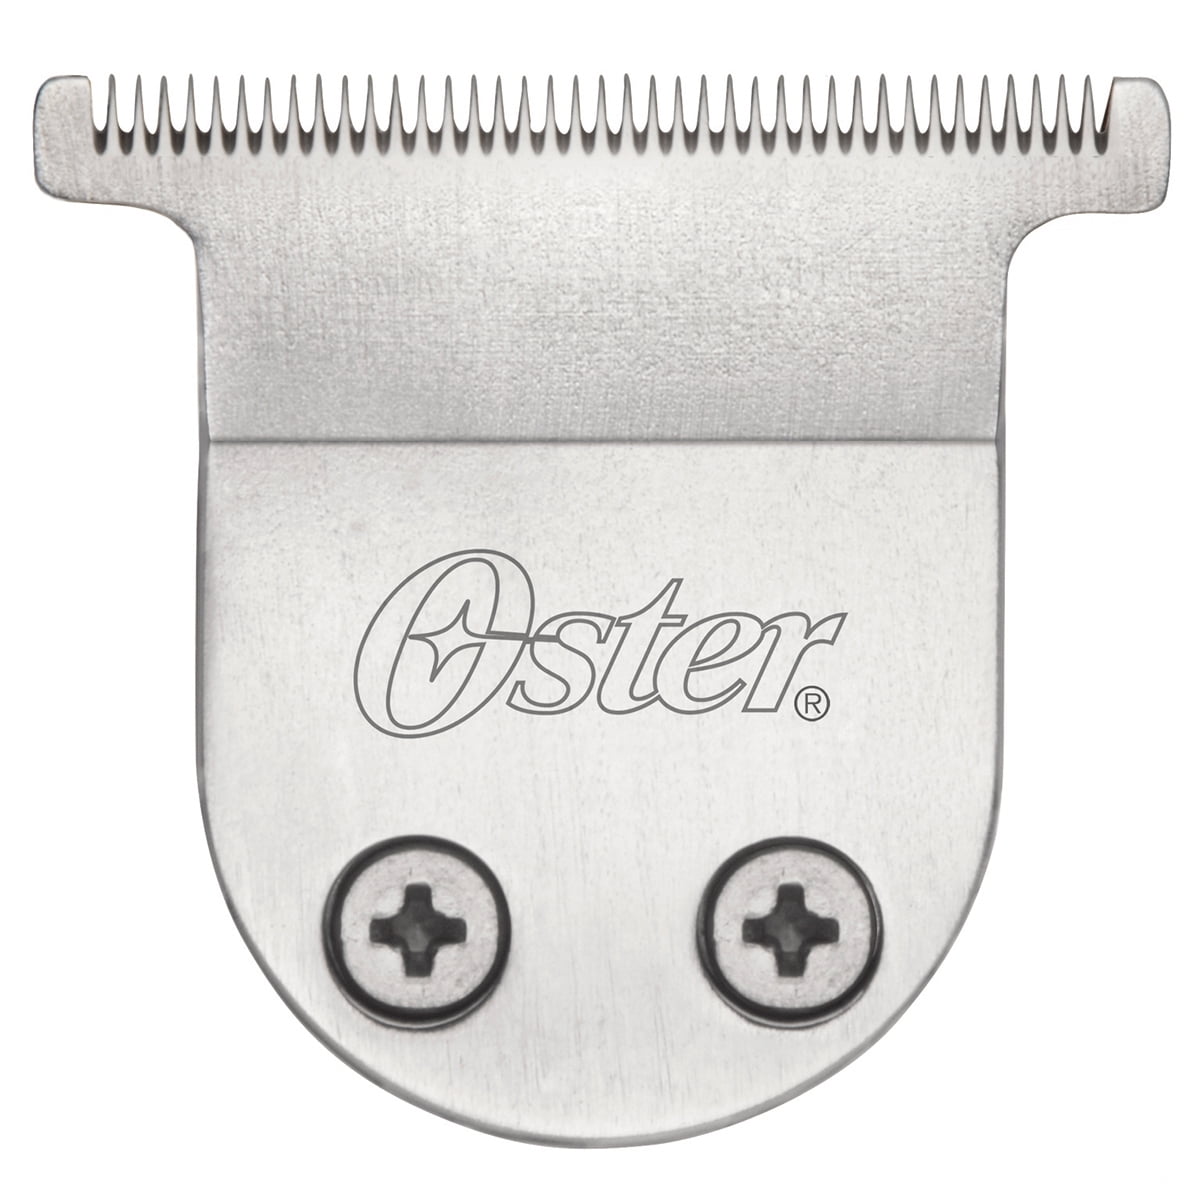 oster teqie replacement blade